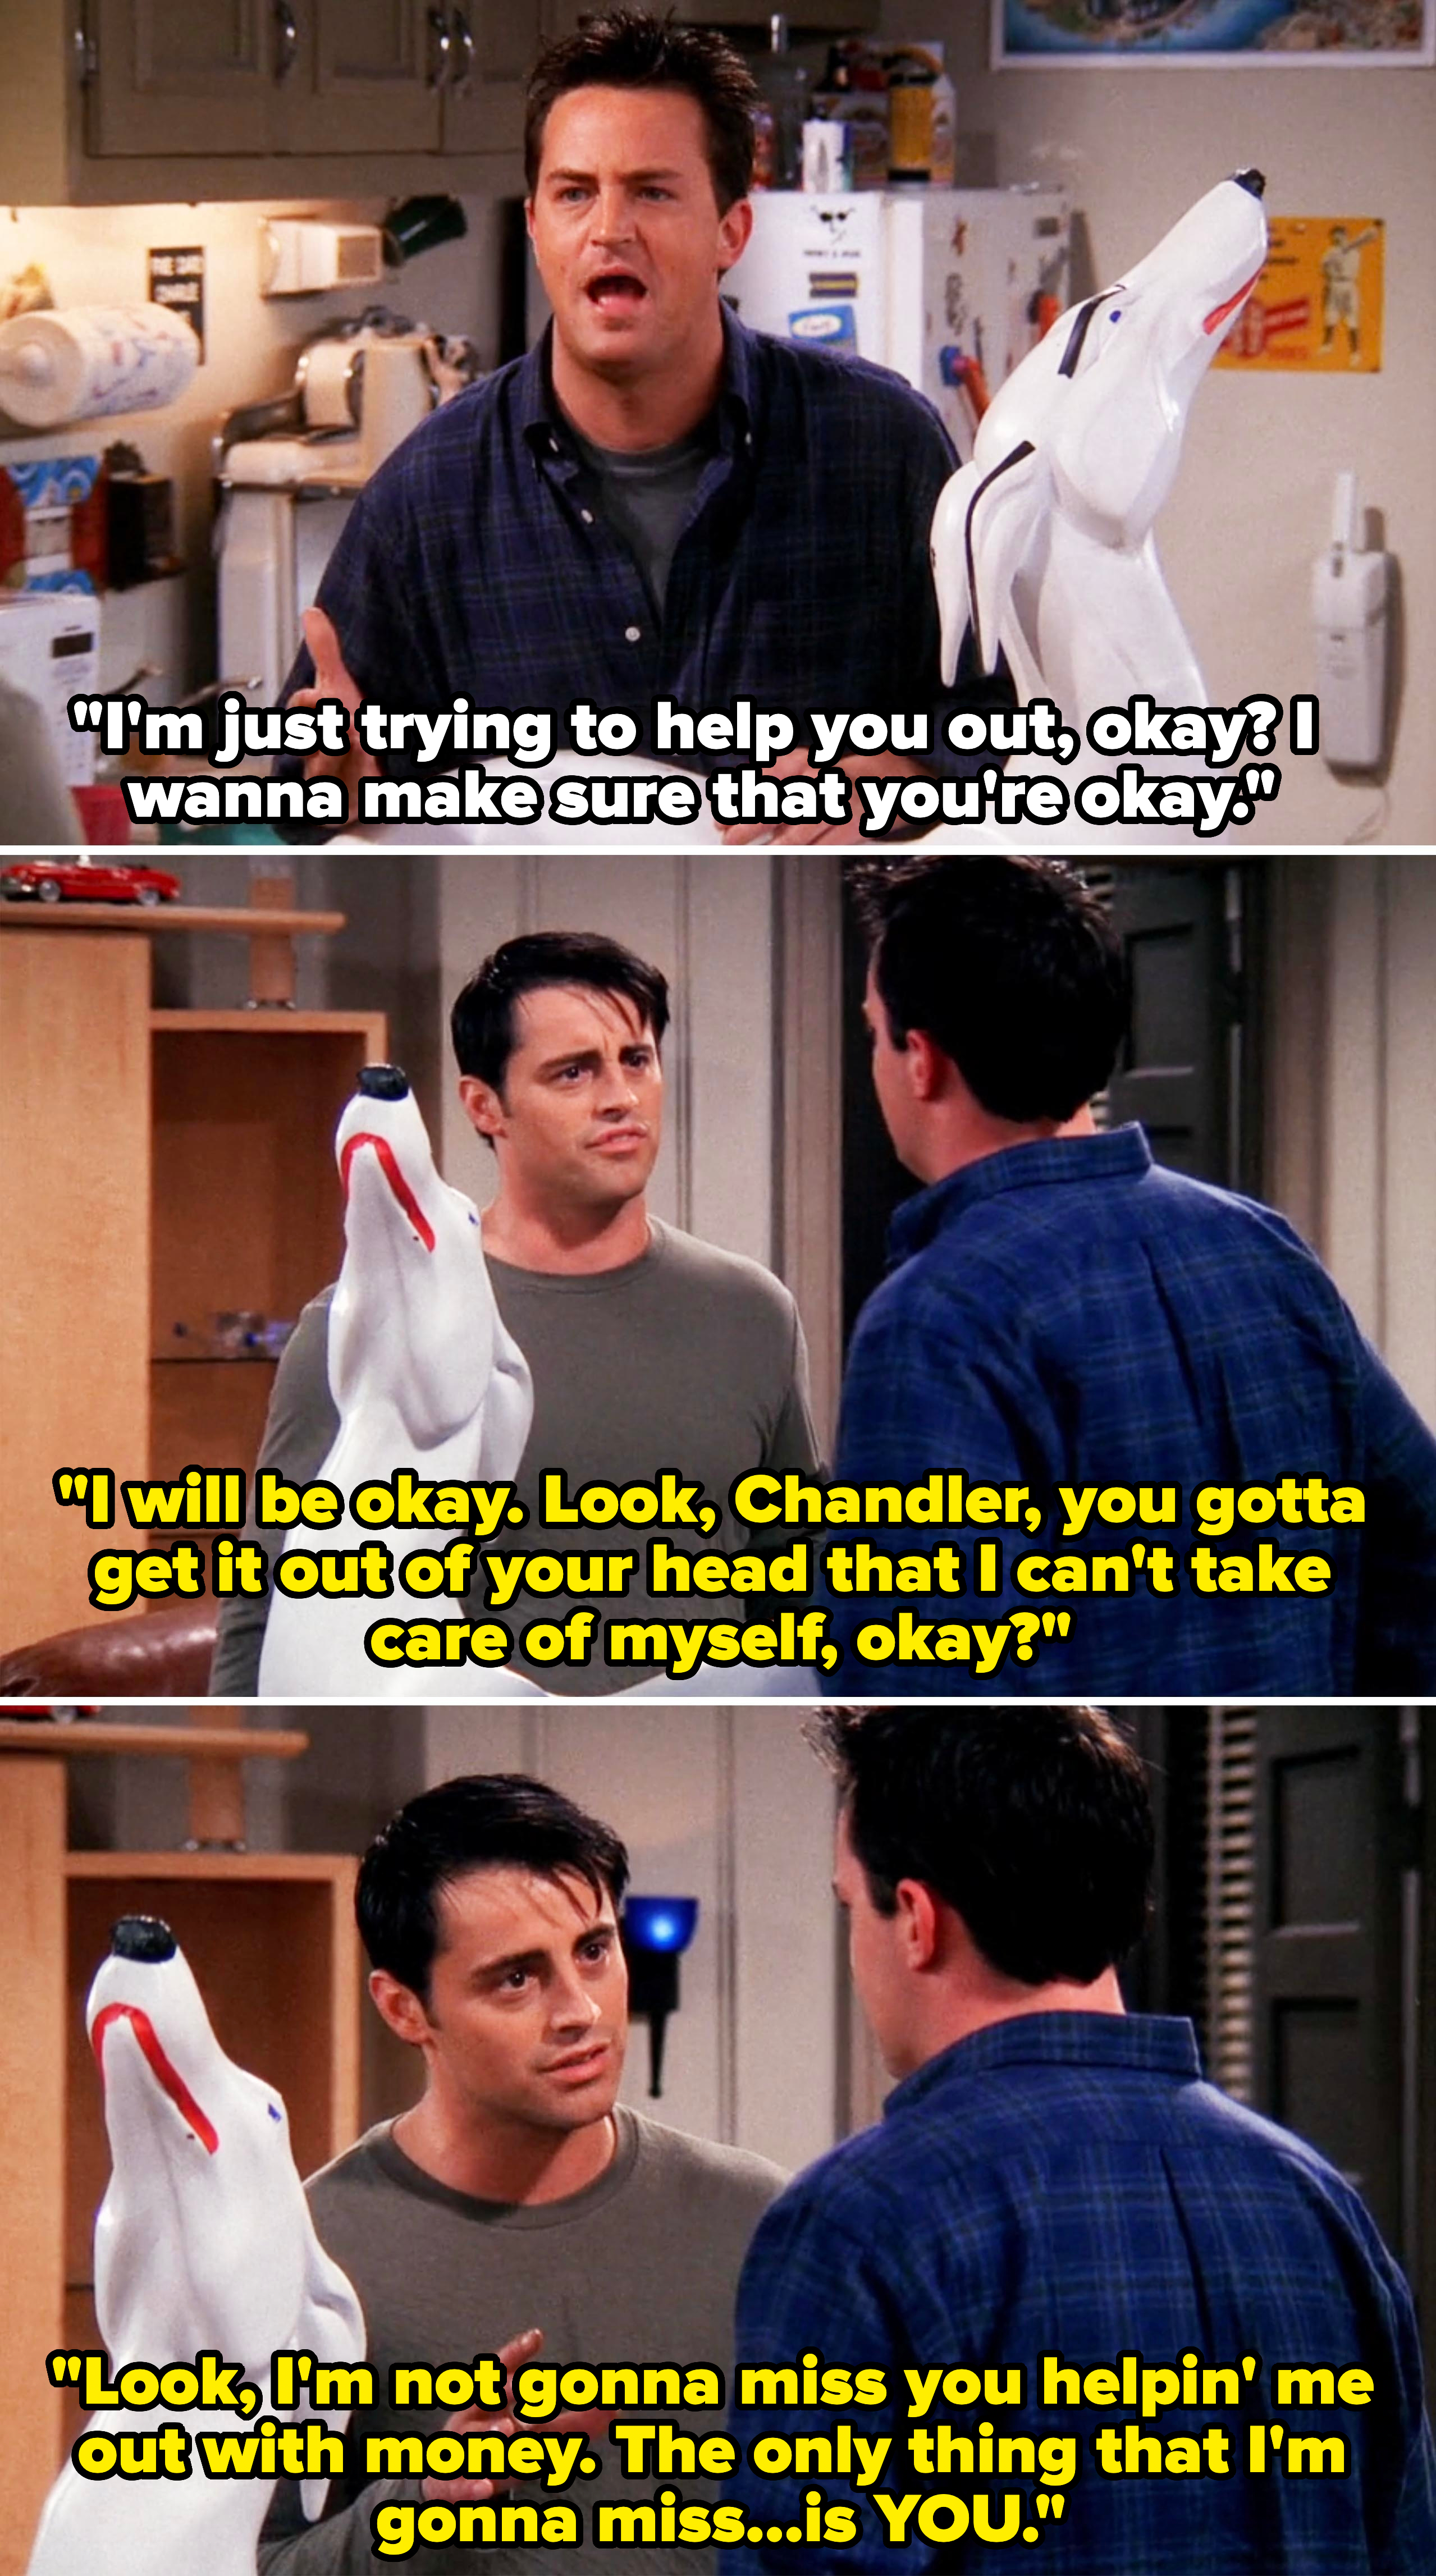 joey saying, i&#x27;m going to be ok, i&#x27;m not gonna miss you helping me out with money, the only thing i&#x27;m going to miss is you